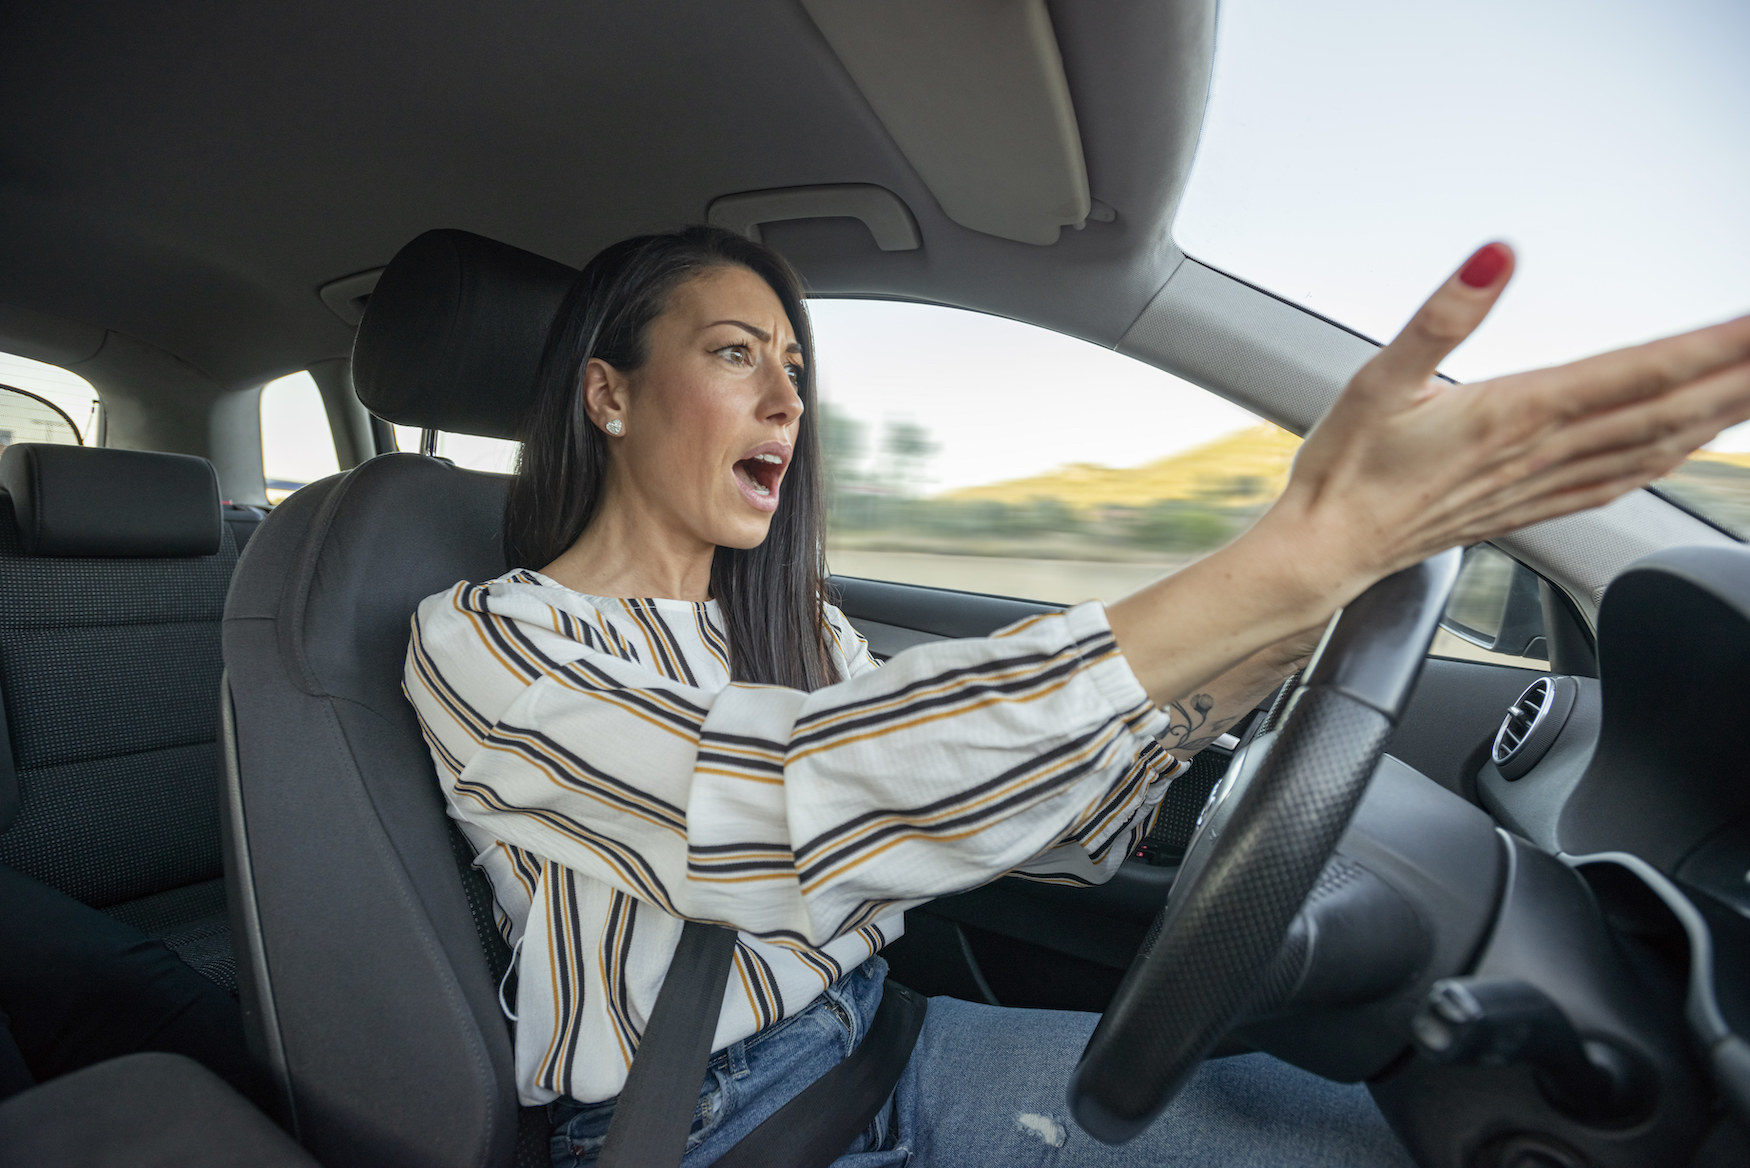 A woman getting angry while driving